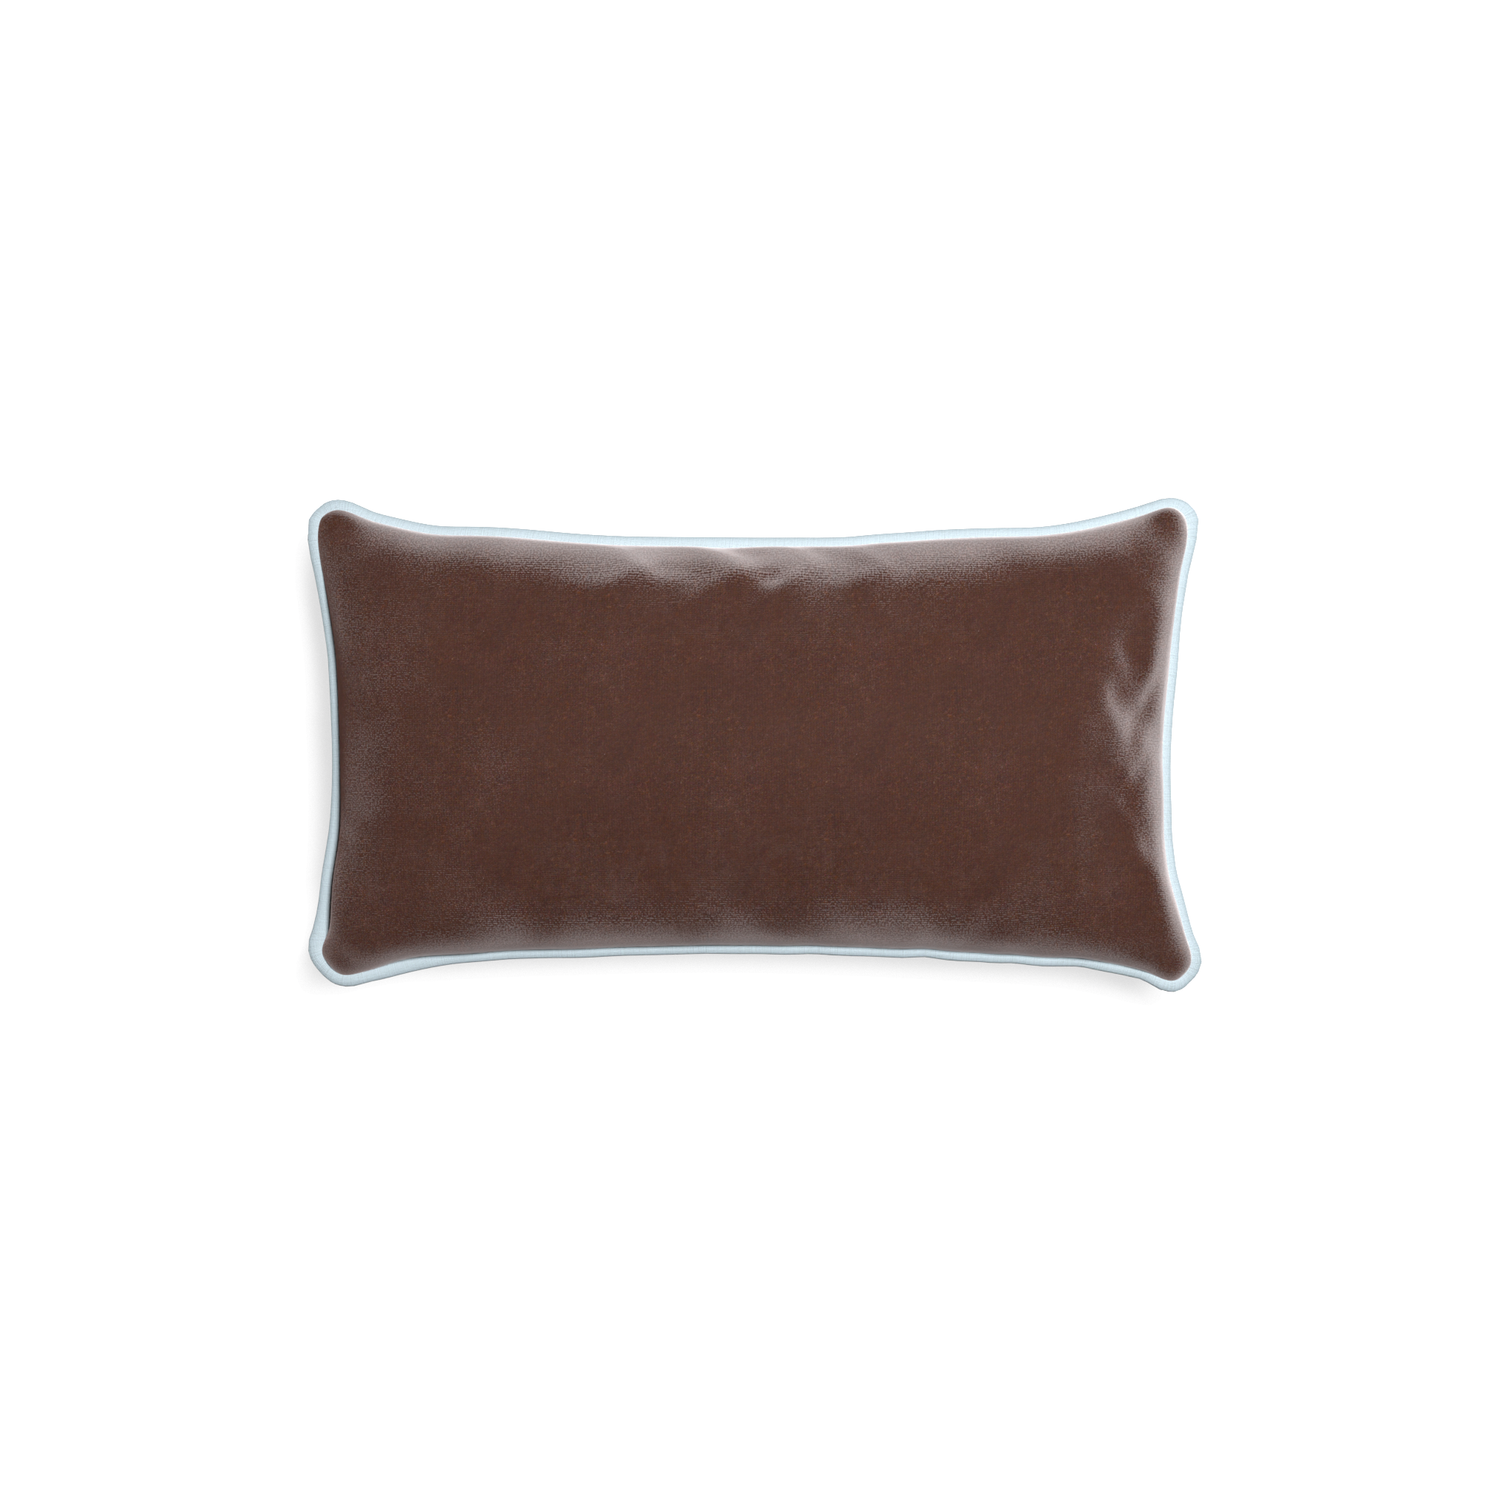 rectangle brown velvet pillow with light blue piping